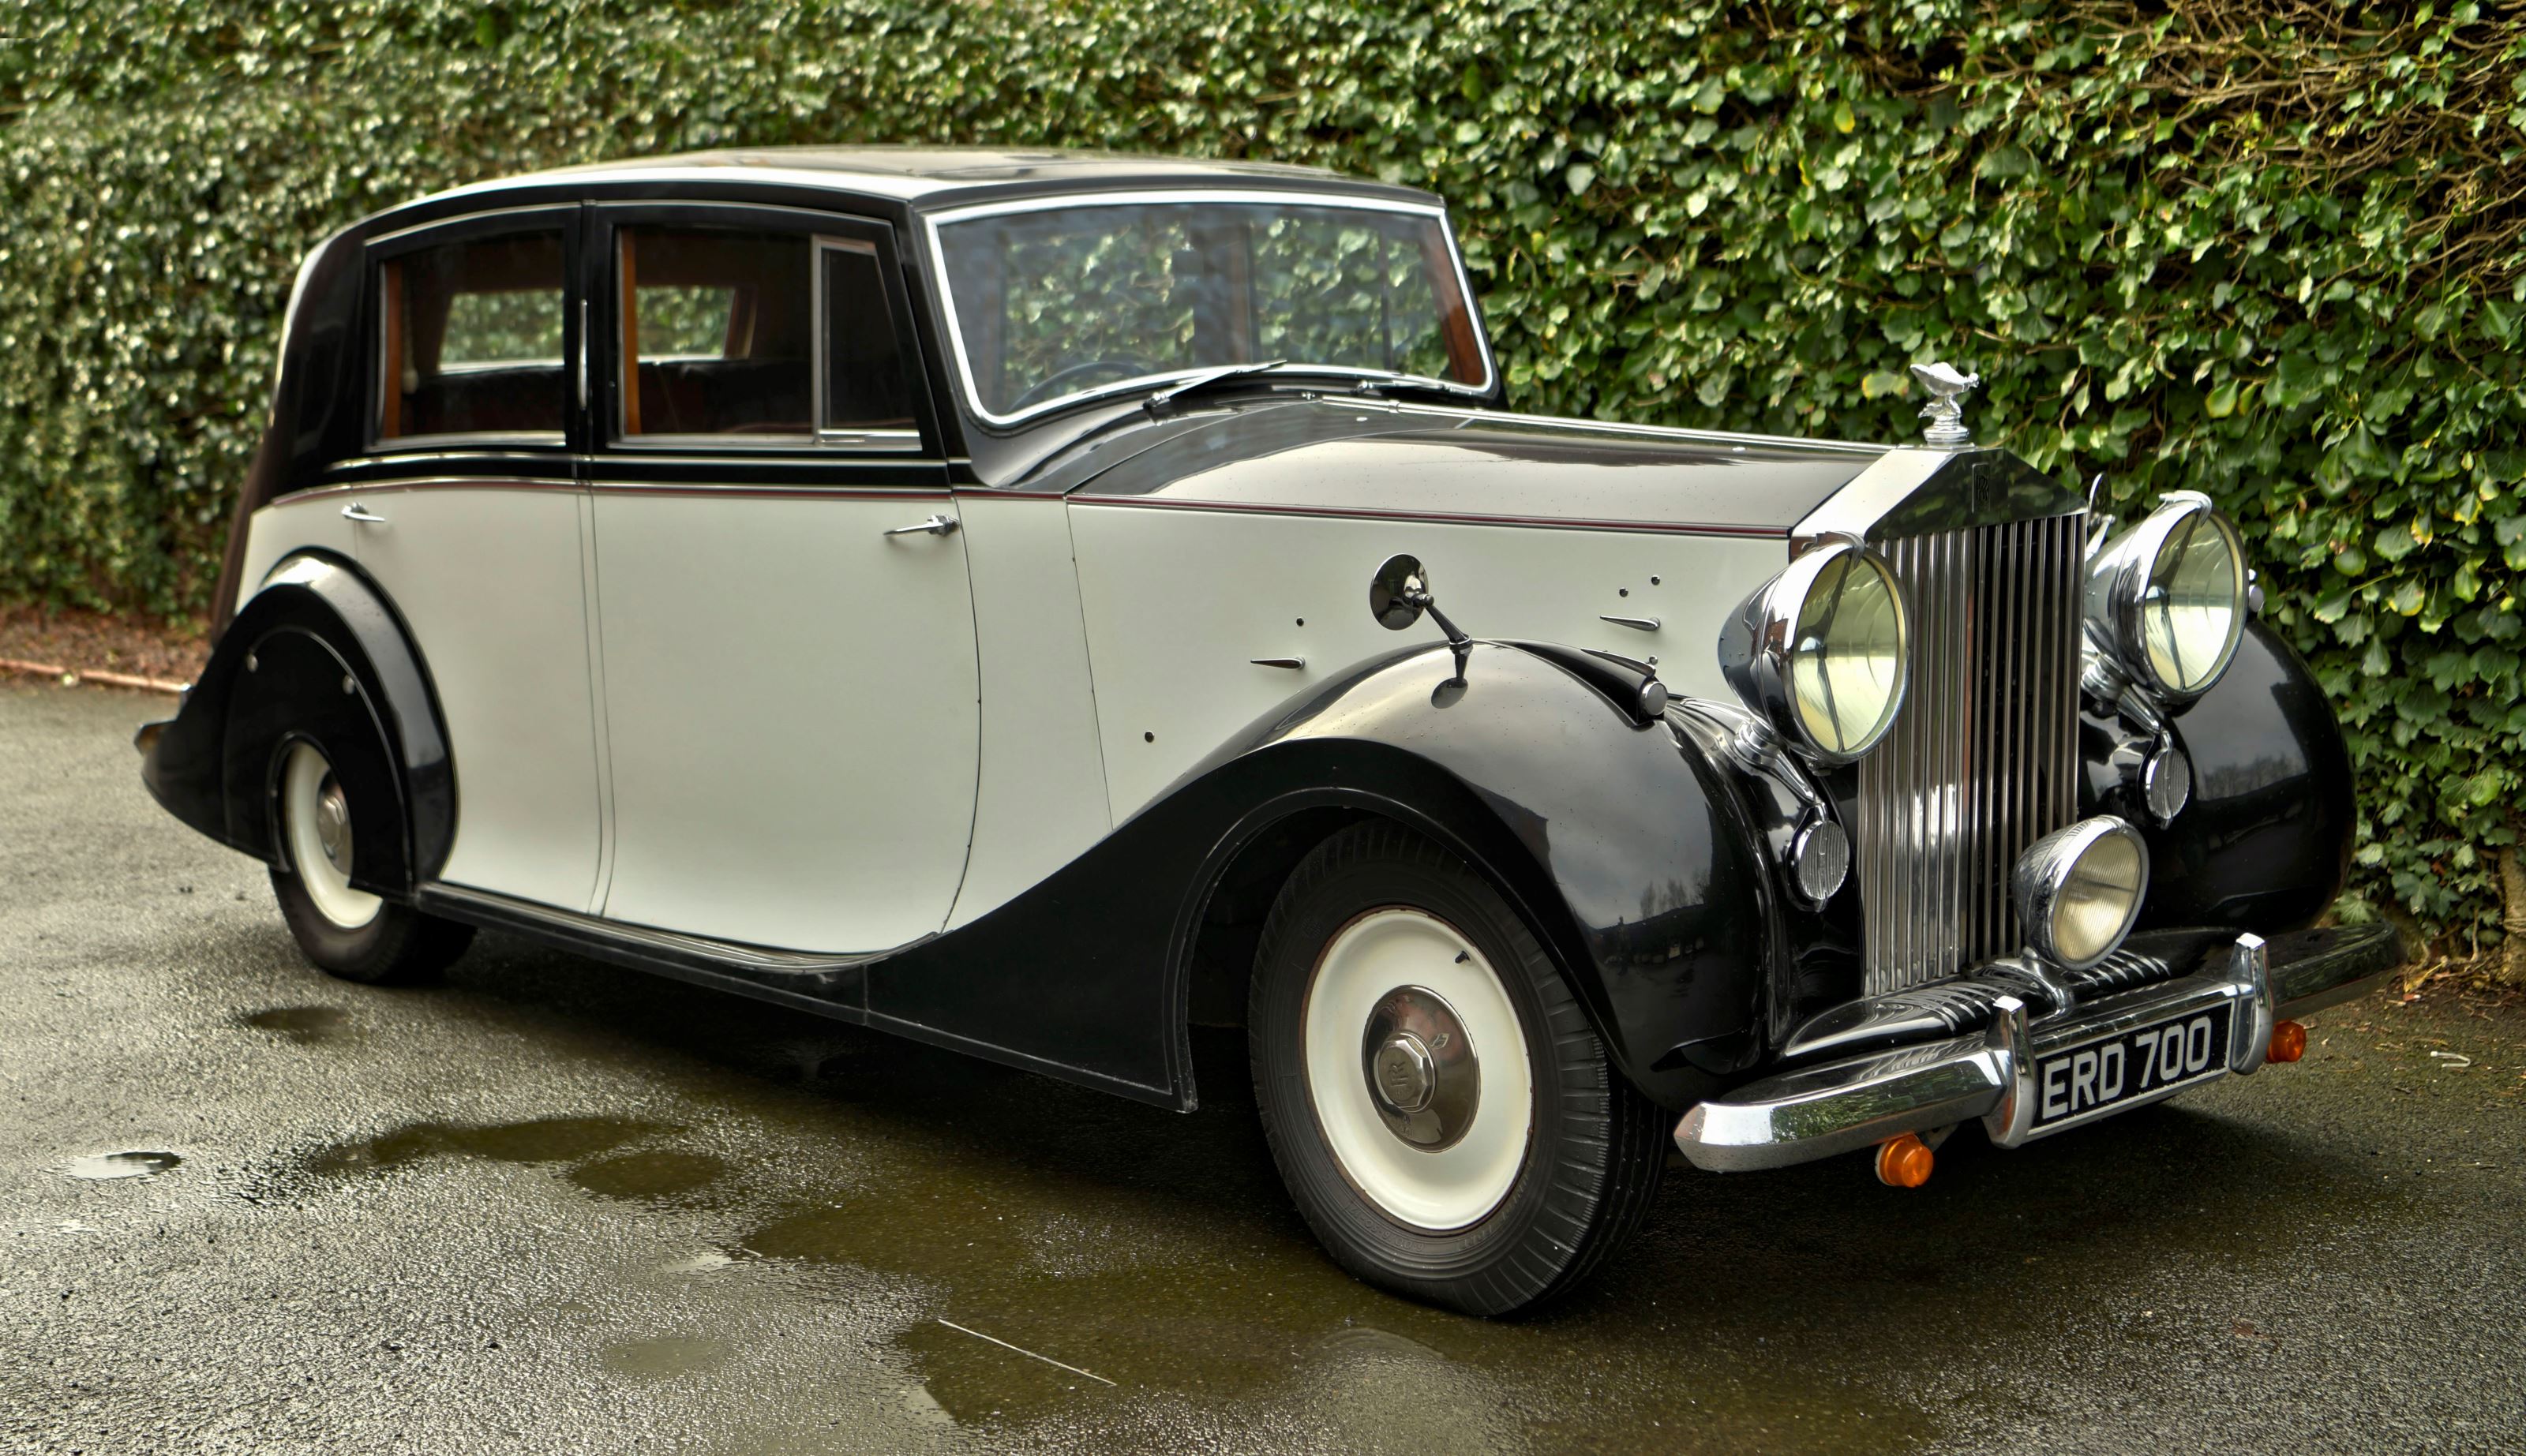 Rolls royce  silver wraith by vincents of reading  cb78v33zotere6vvbd2mz